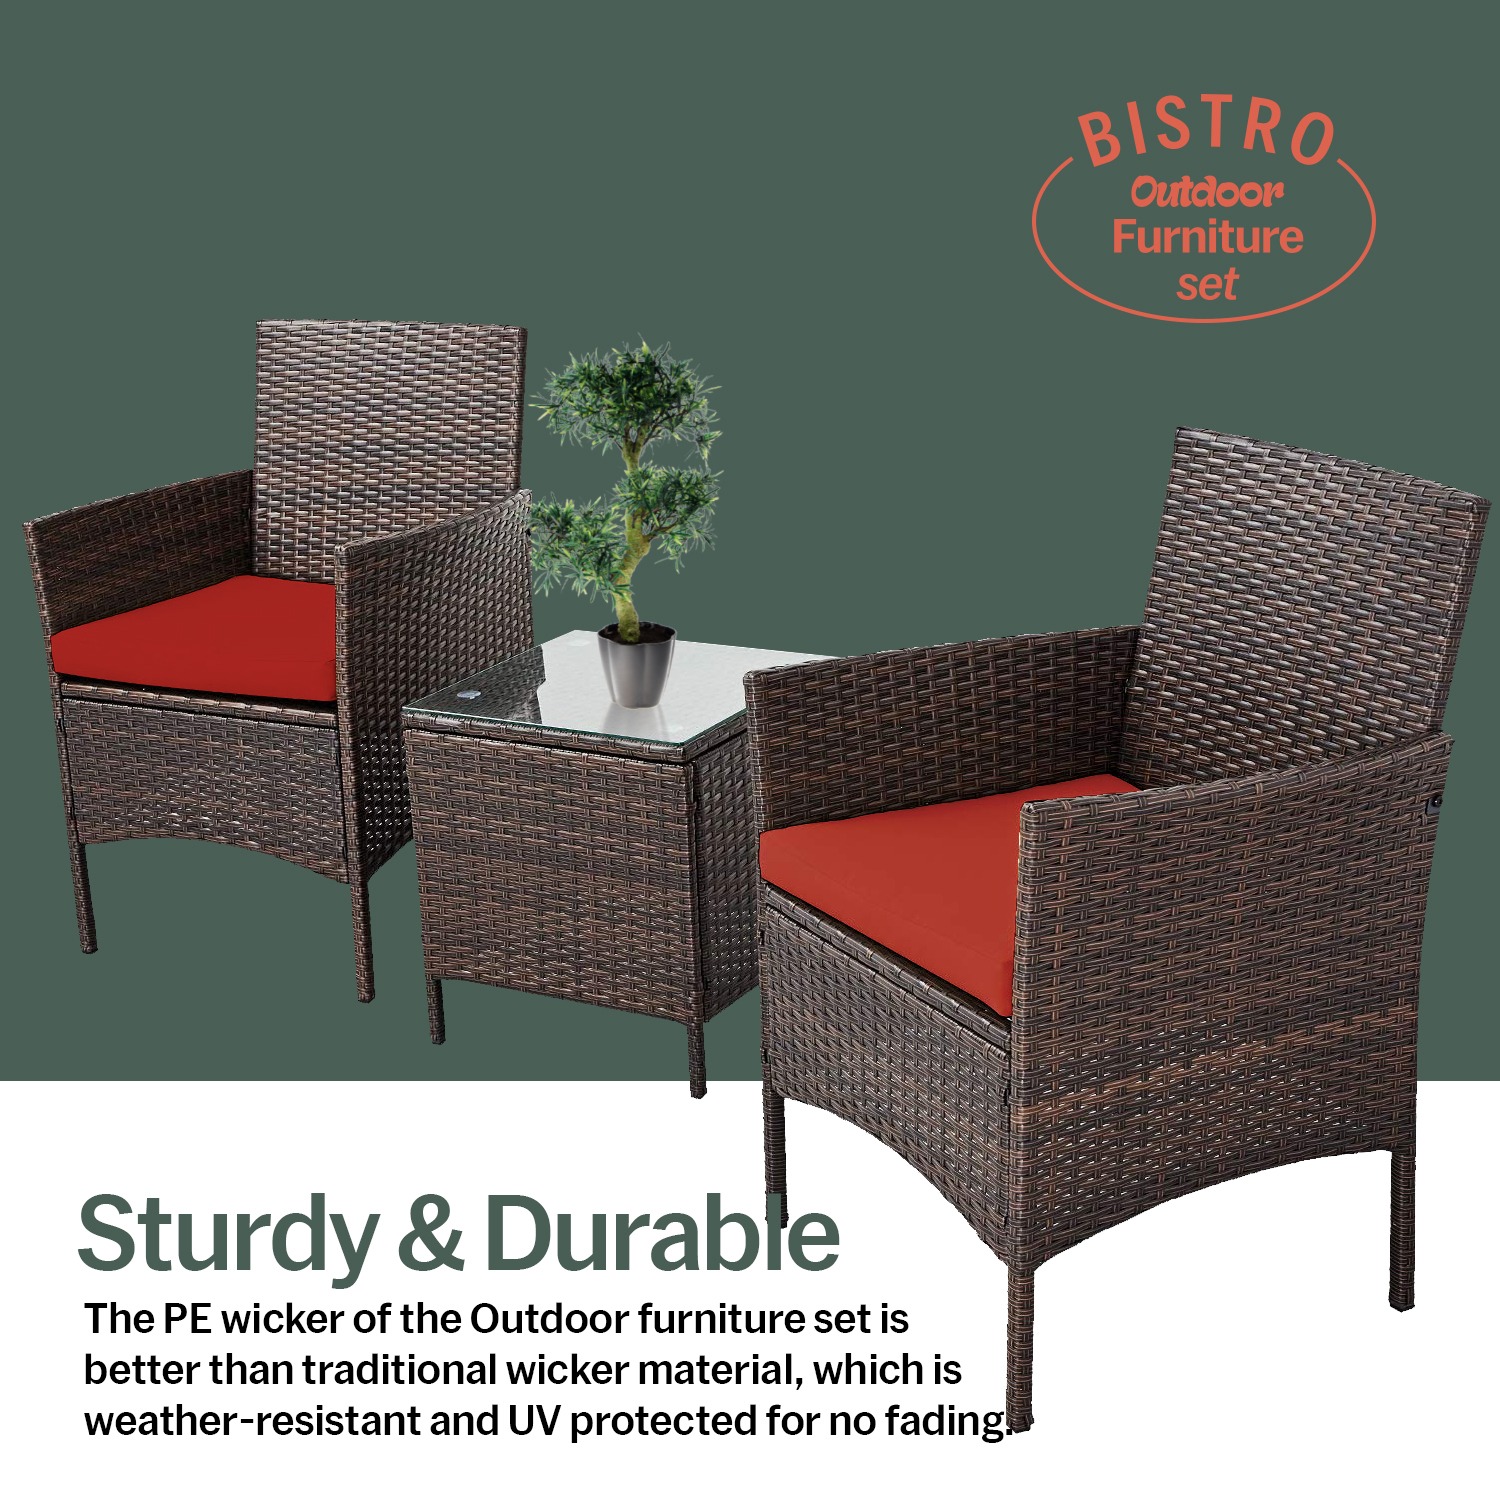 Canaan 3 Piece Rattan Quality Outdoor Furniture Set – 2 Durable Chairs With a Tea Table - Red - image 3 of 10